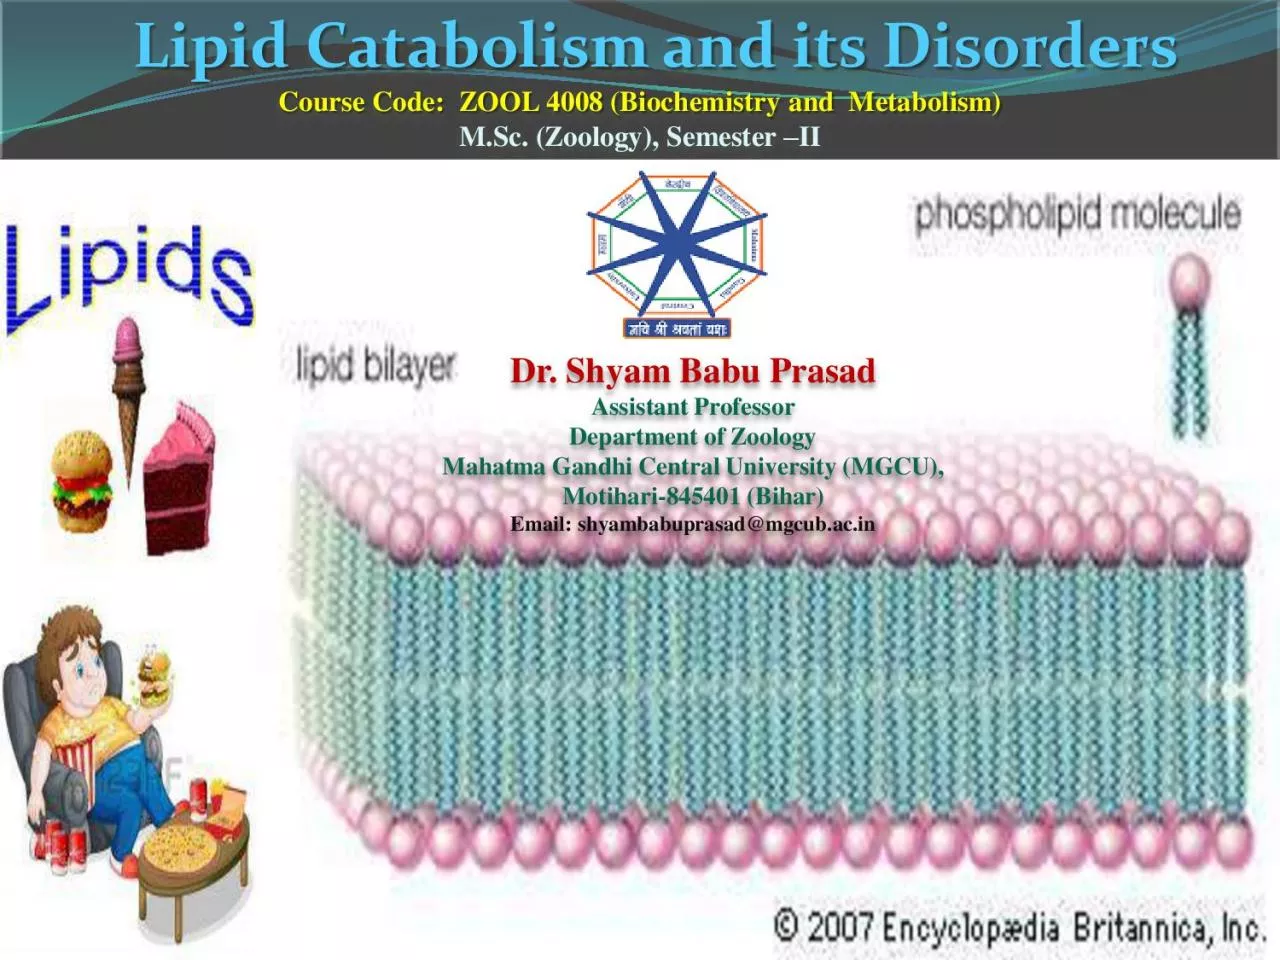 Lipid Catabolism and its Disorders